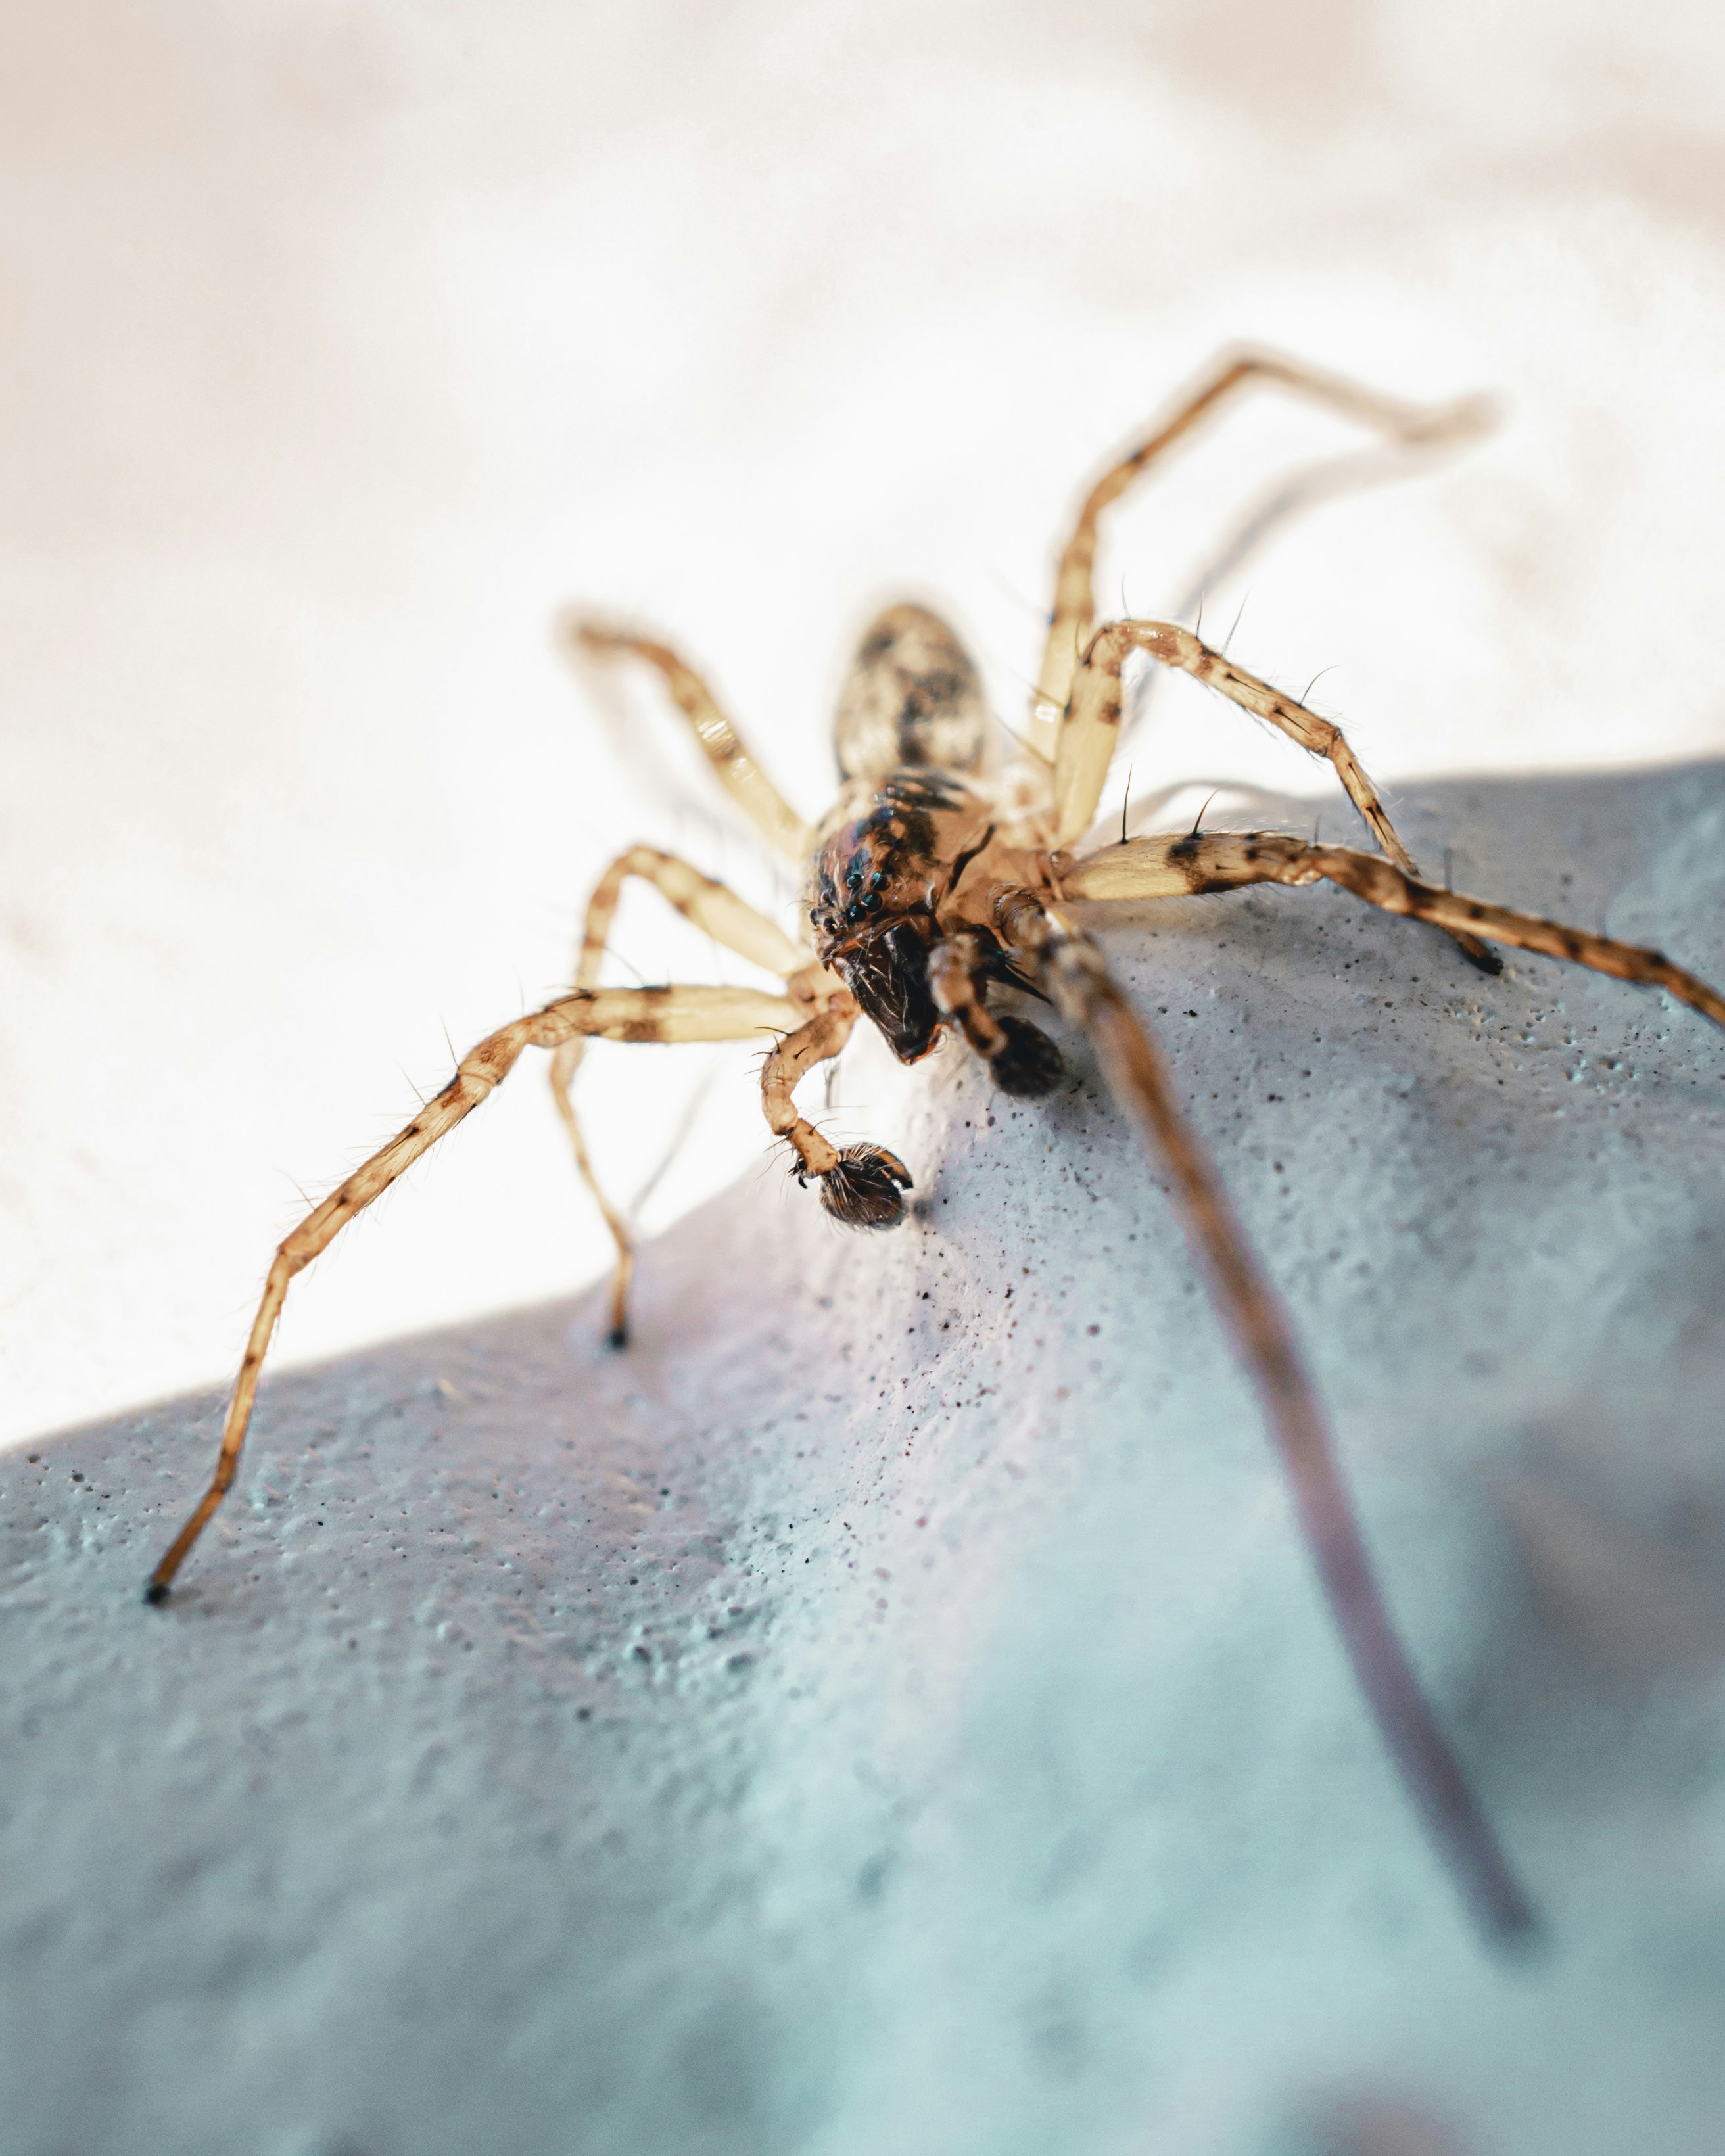 How to Overcome the Fear of Spiders (Arachnophobia) with CBT